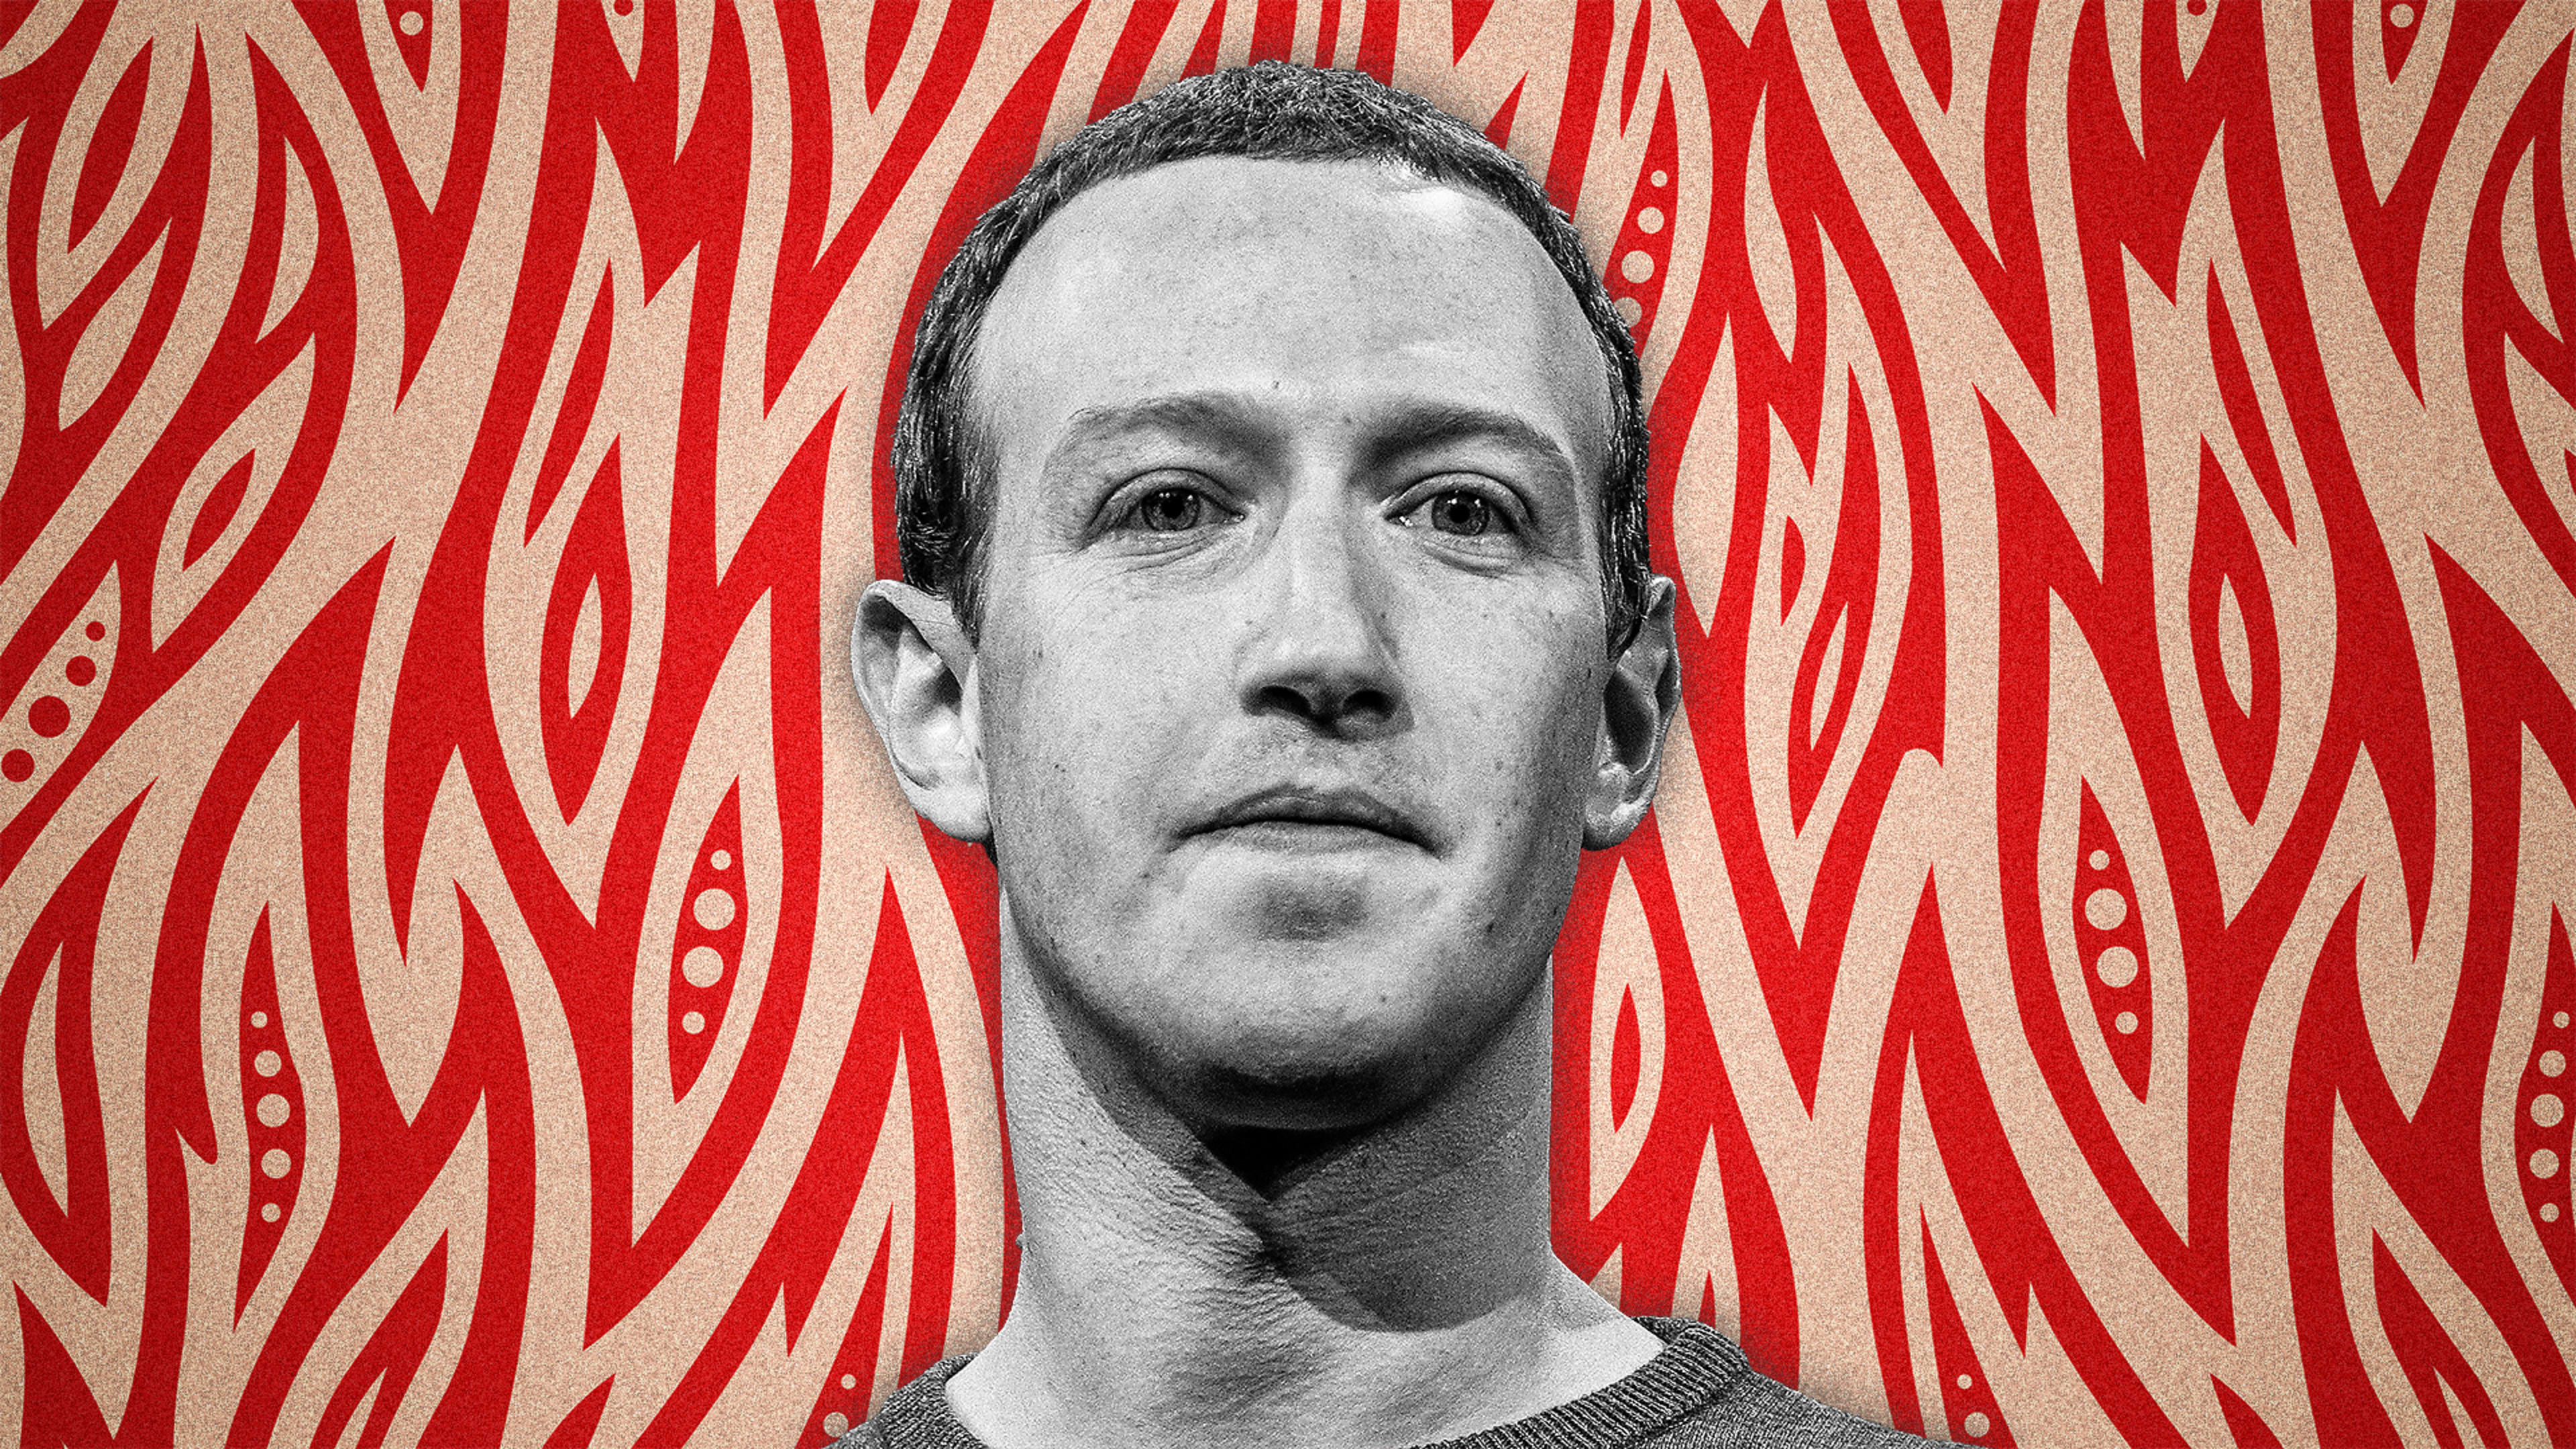 A plea to Facebook: Everyone knows you’re villains. Just embrace it